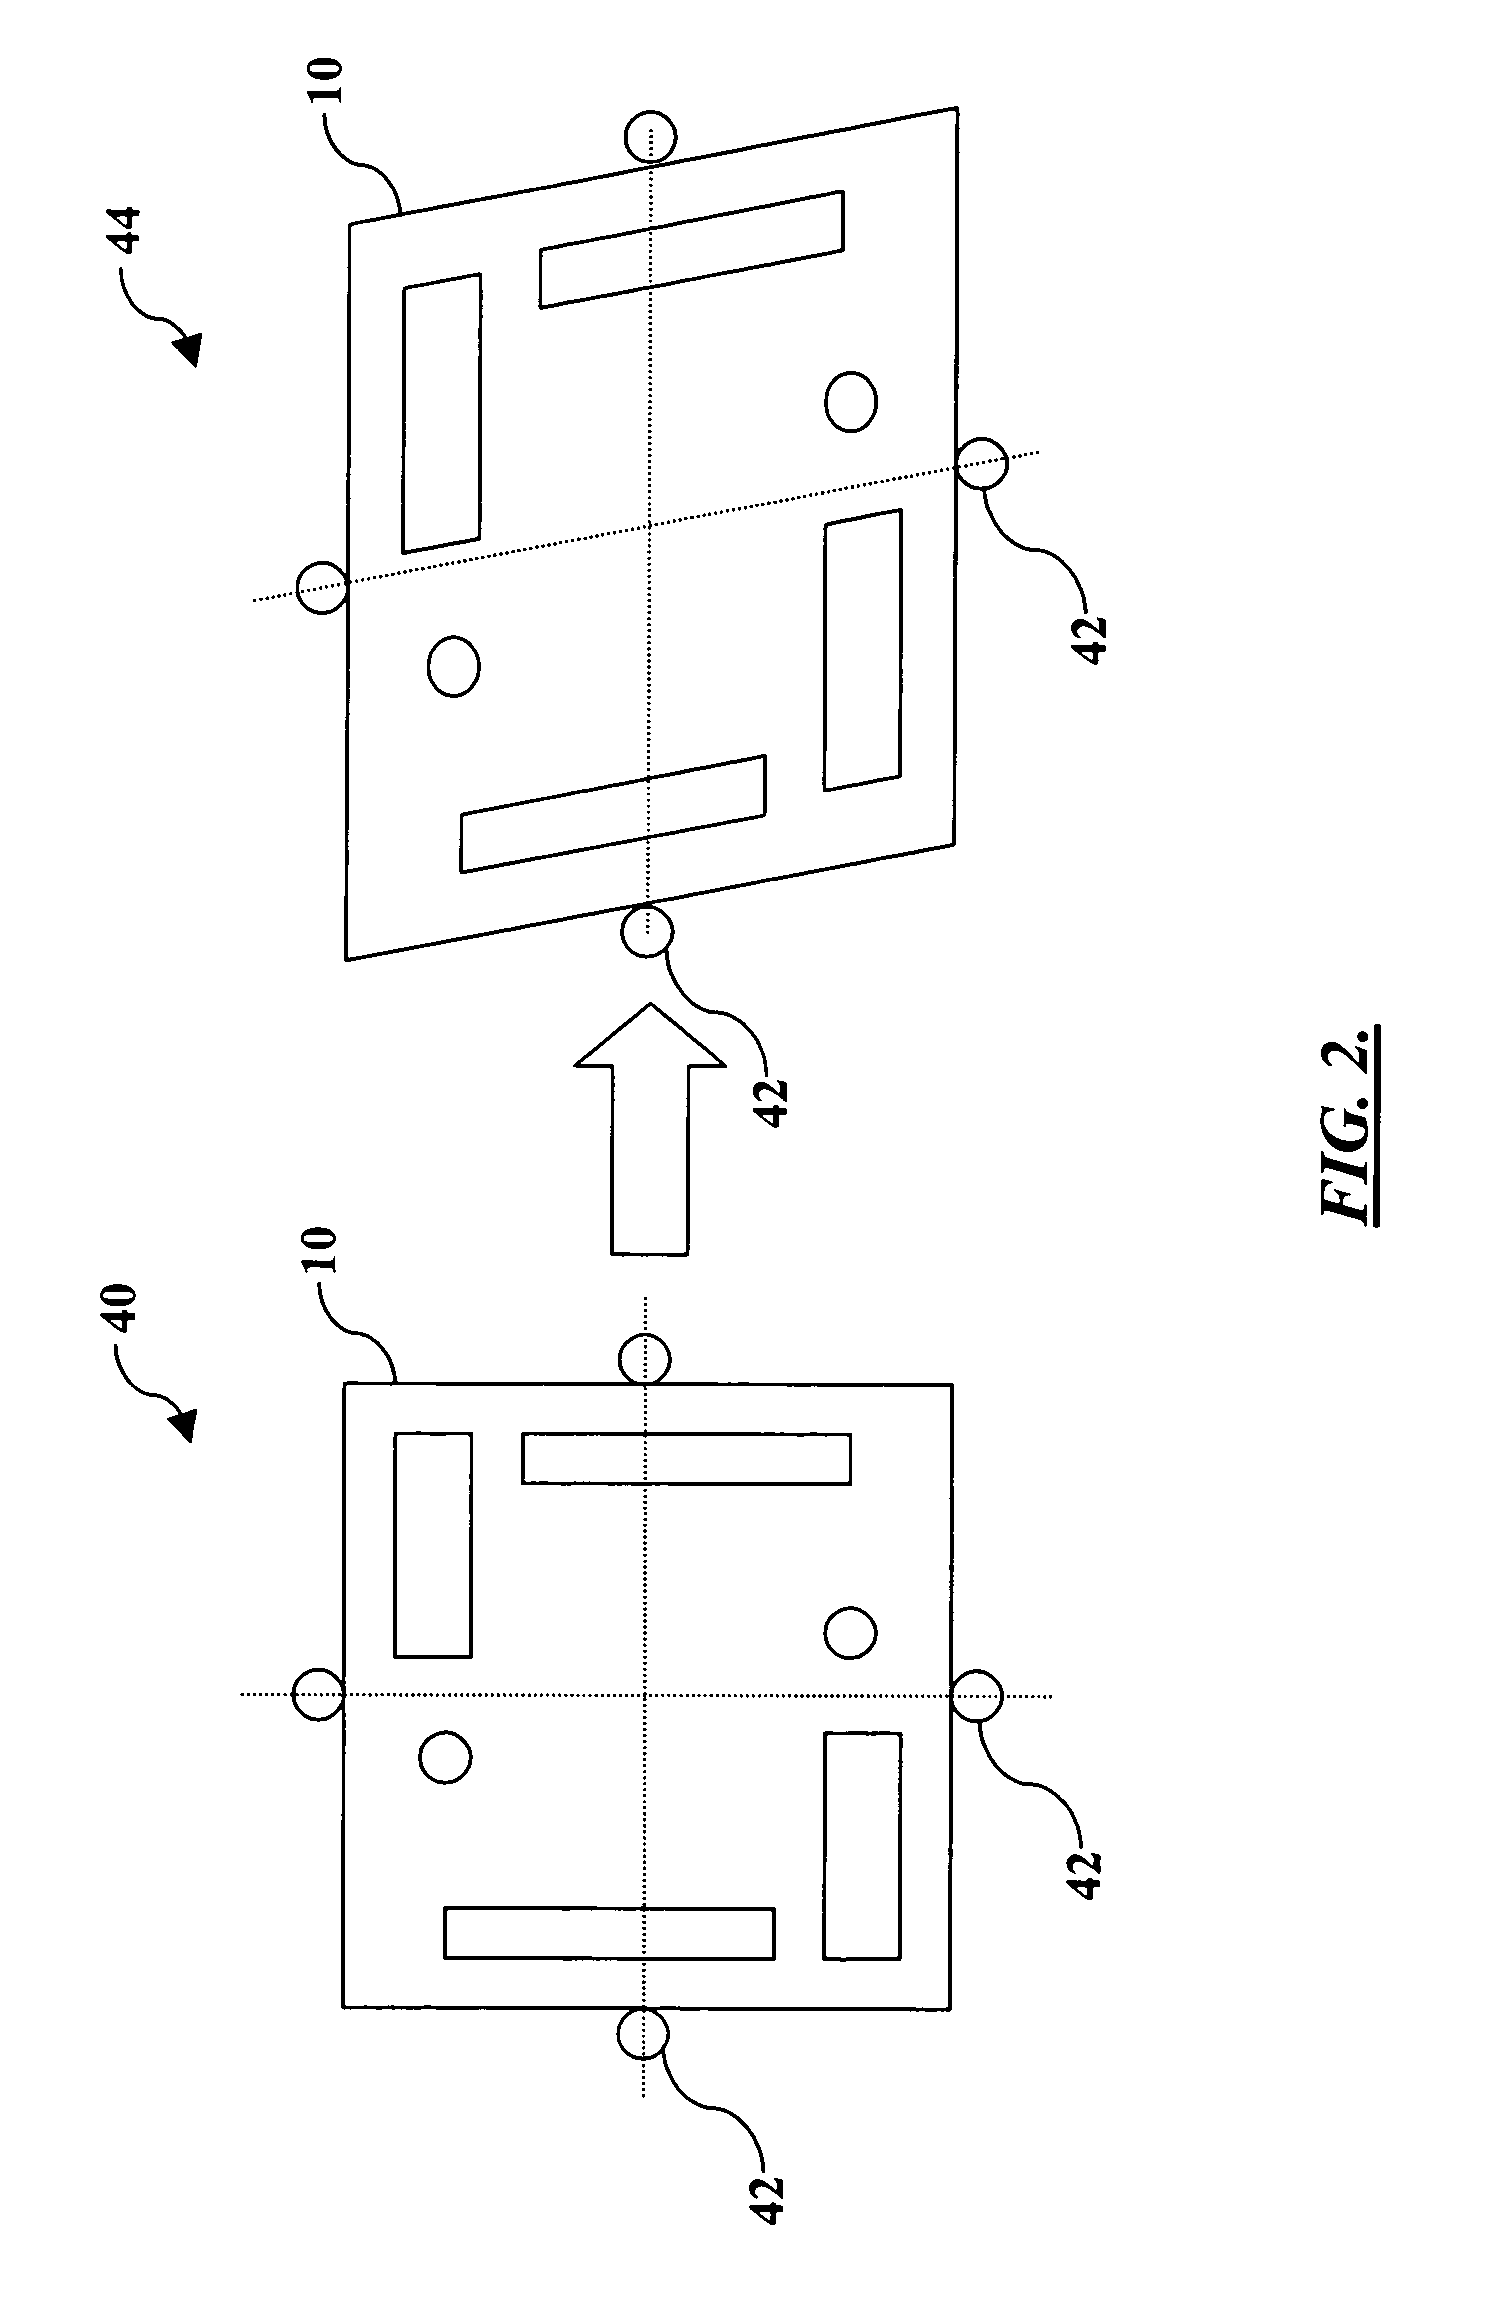 Fiducial calibration method and system for assembling parts